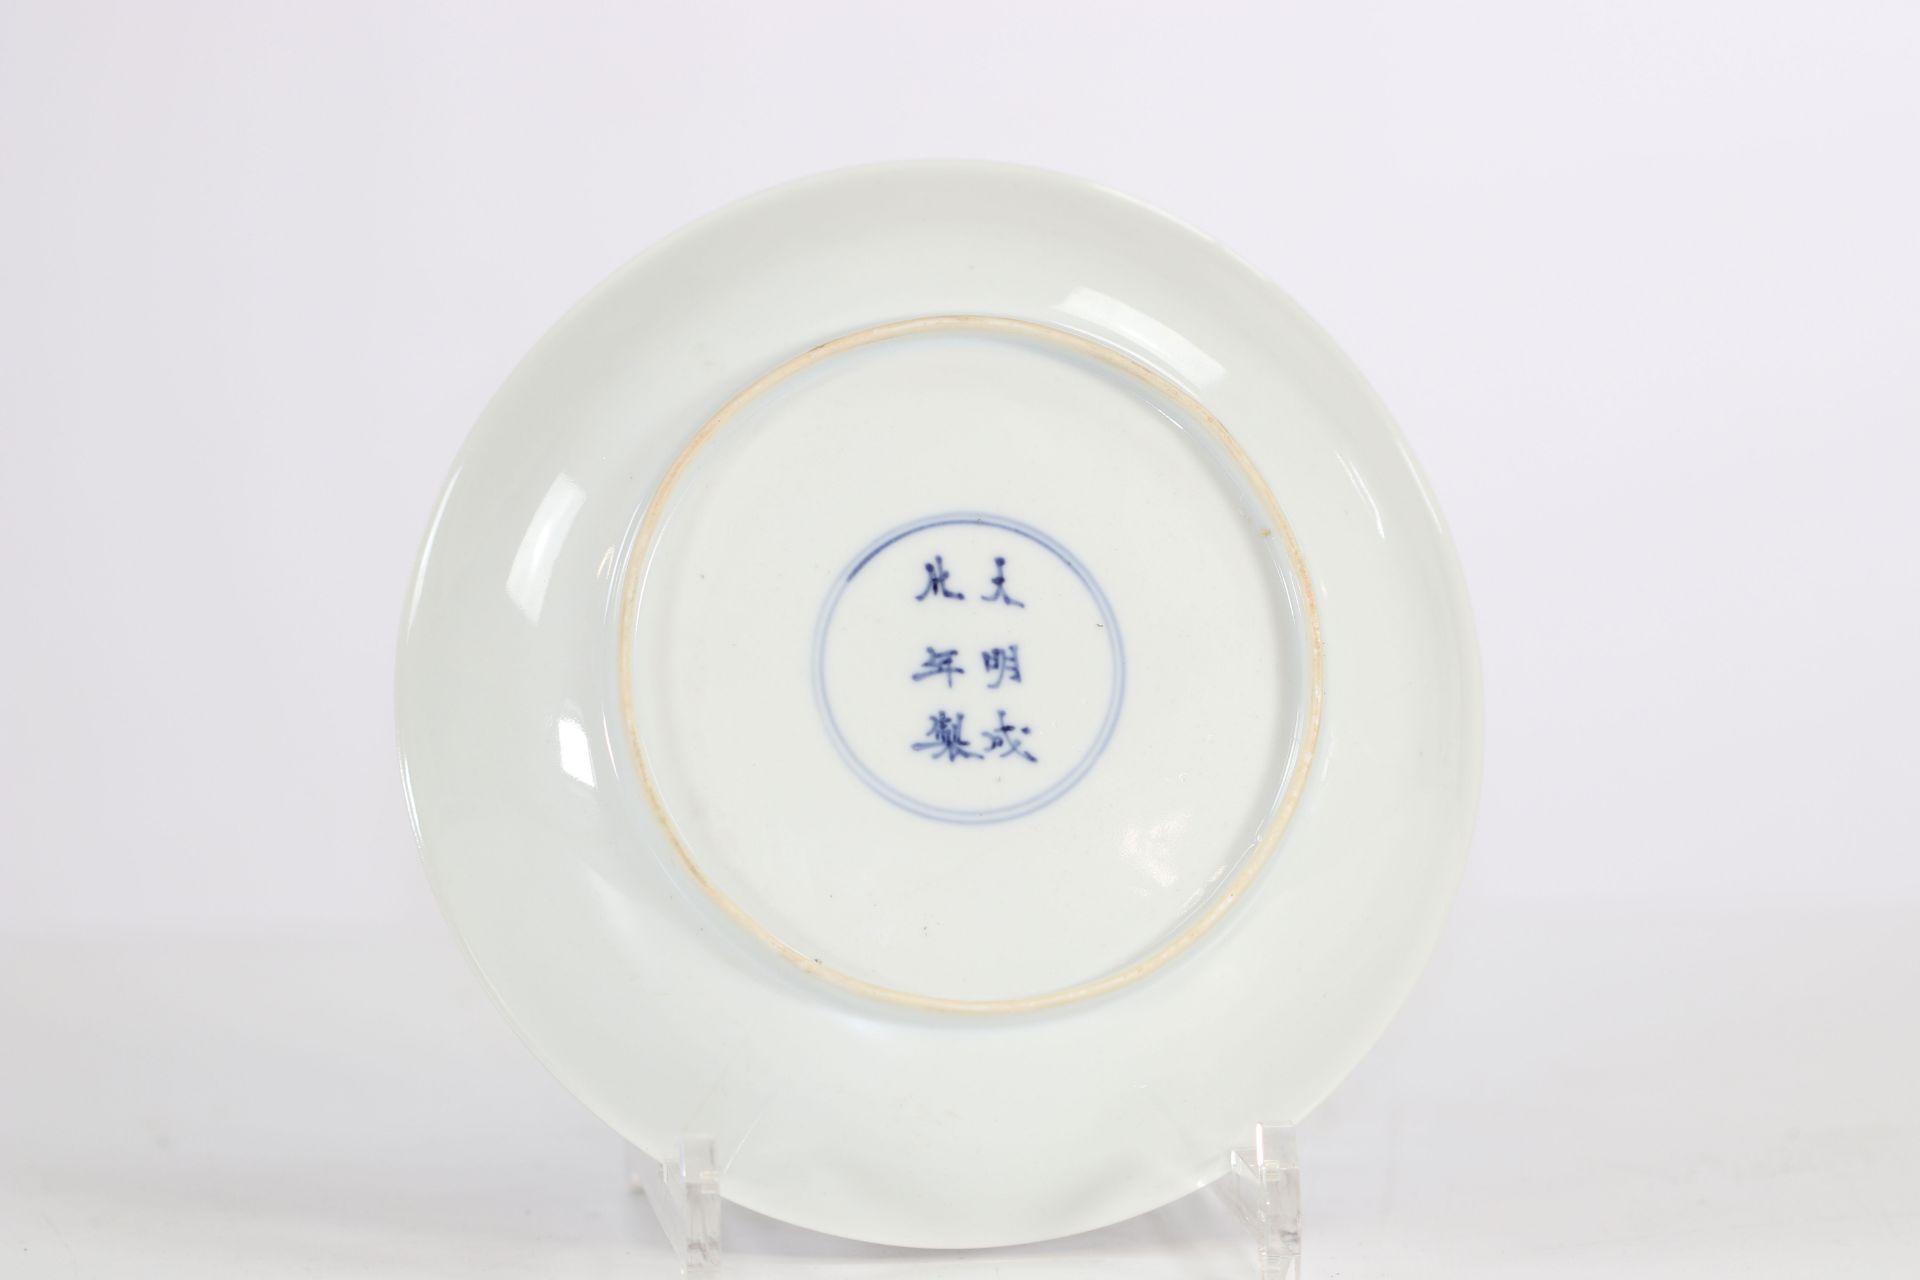 China Kangxi porcelain plate decorated with a trendy bird (restauraton) - Image 2 of 2